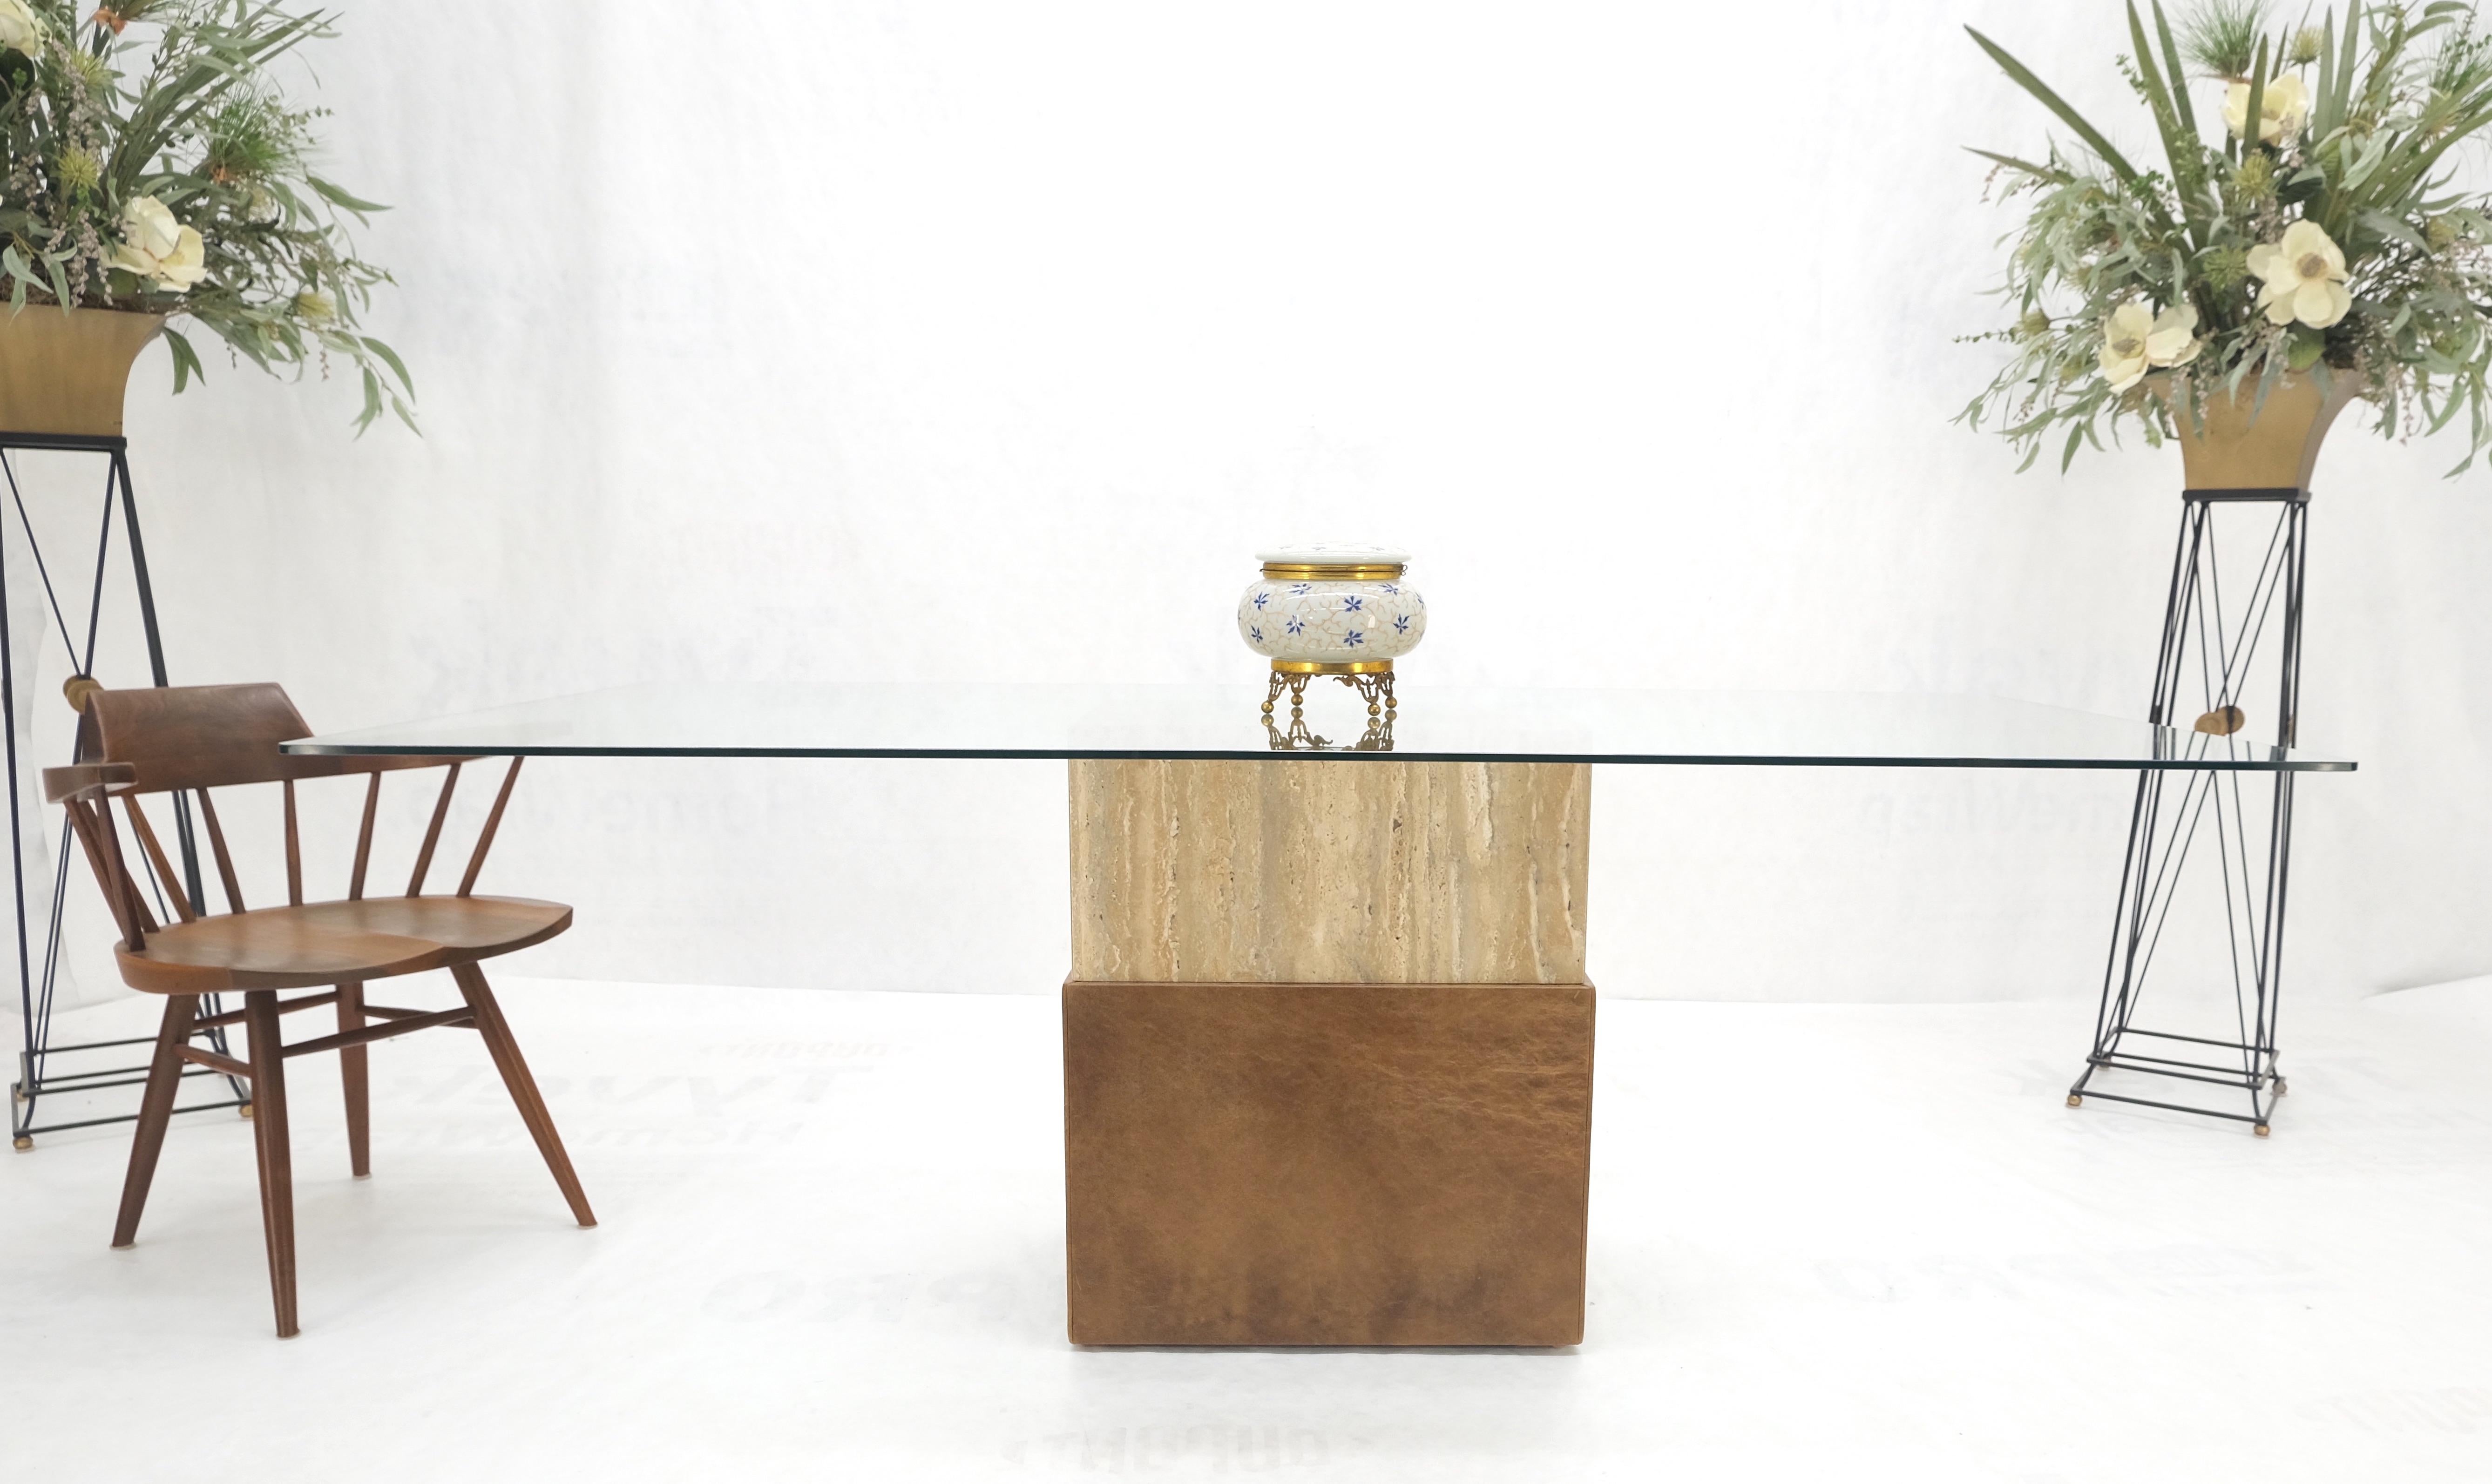 Travertine and Leather Single Pedestal Glass Top Italian Mid Century Modern Rectangle Dining Table MINT!